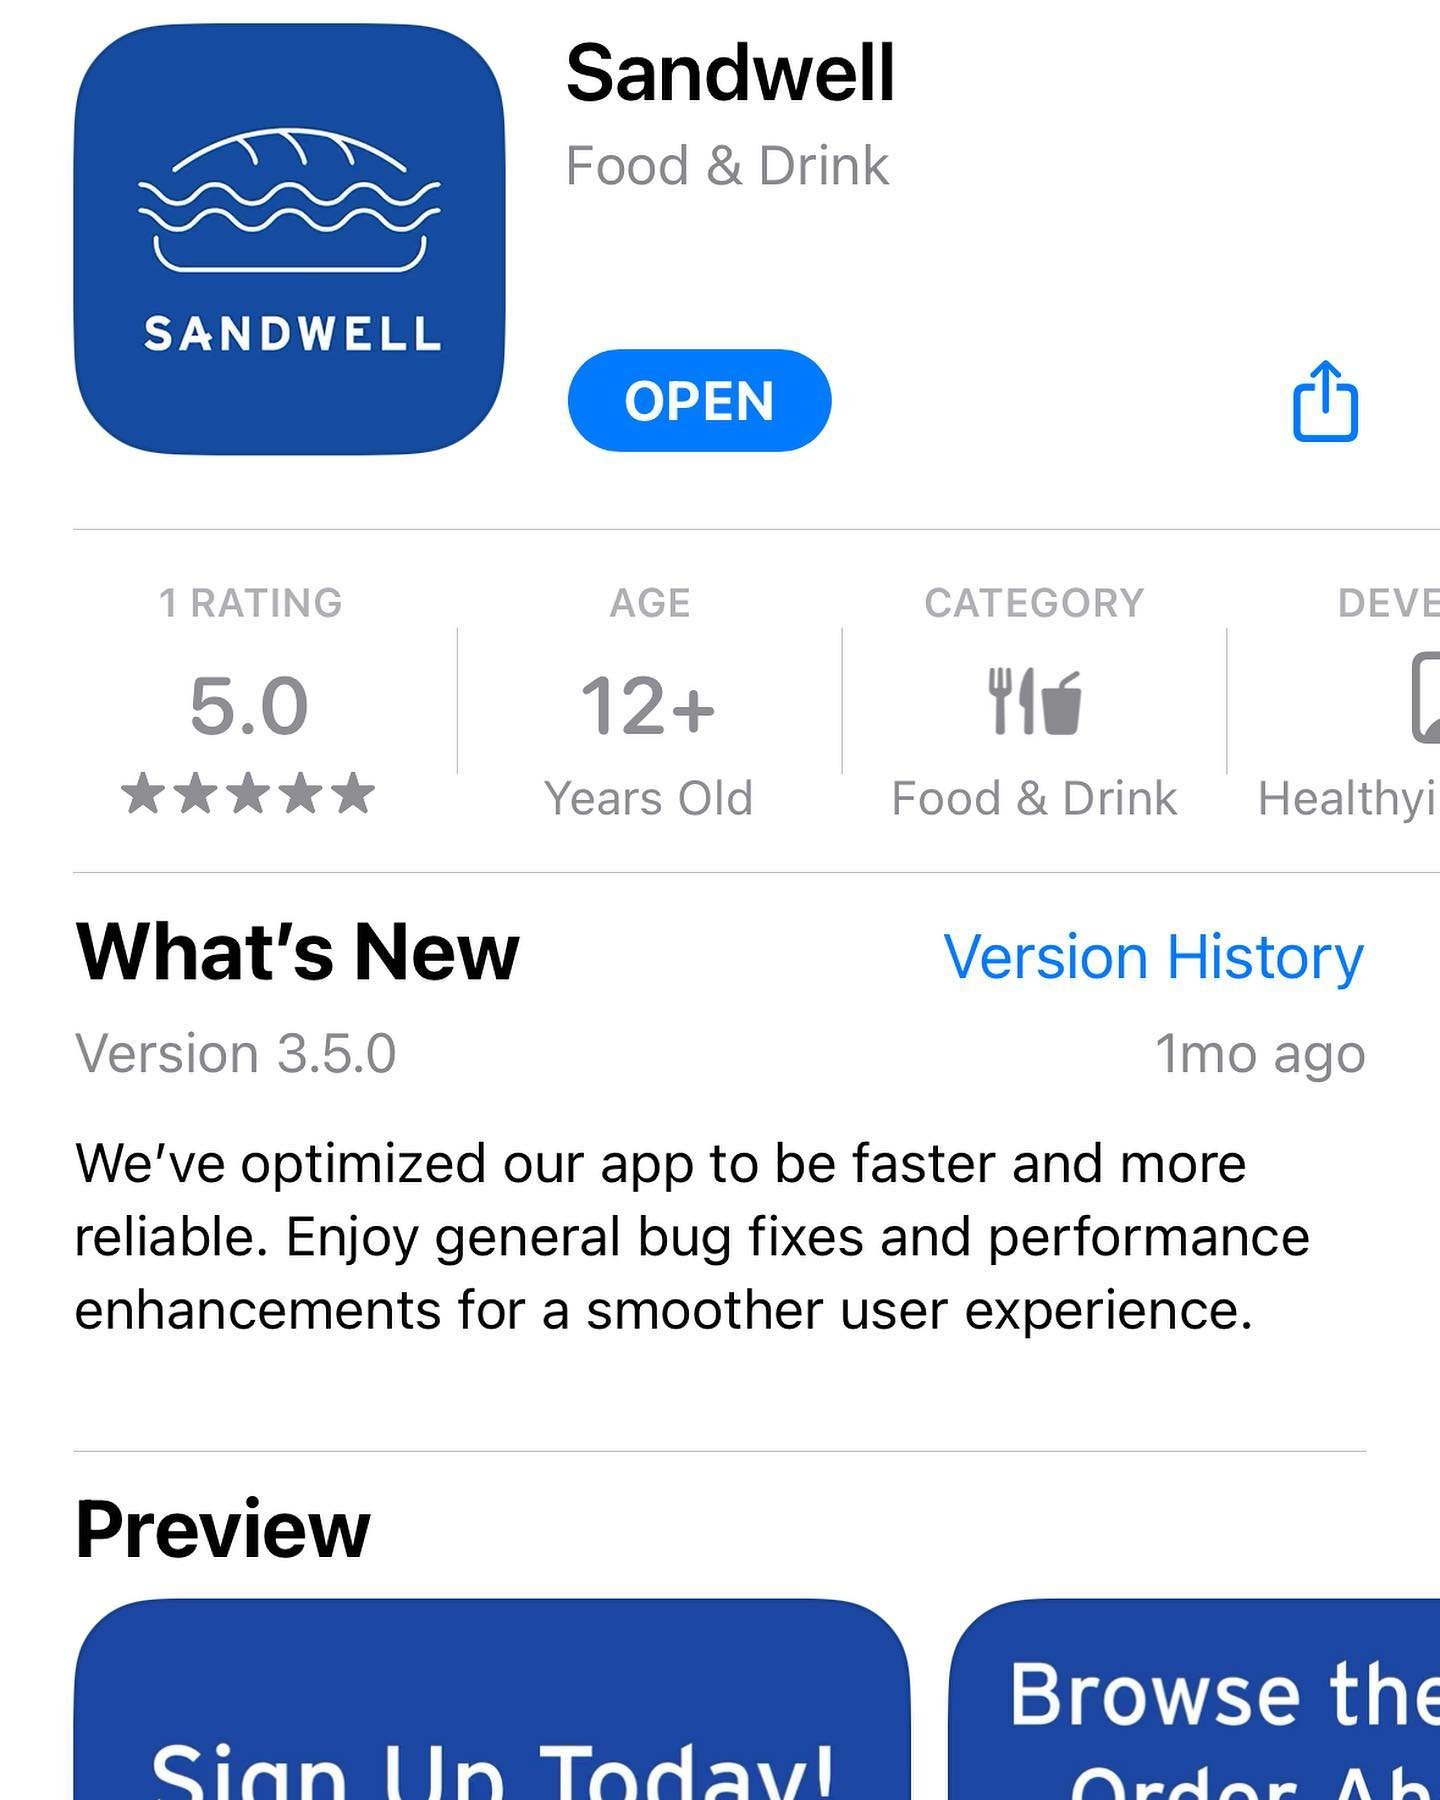 we&rsquo;ve got a big week of spring specials ahead, and the only way to get exclusive access to our new sandwich creations is by downloading the @getsandwell app today! with bonus loyalty points and access to secret menu items like our chicken parm 